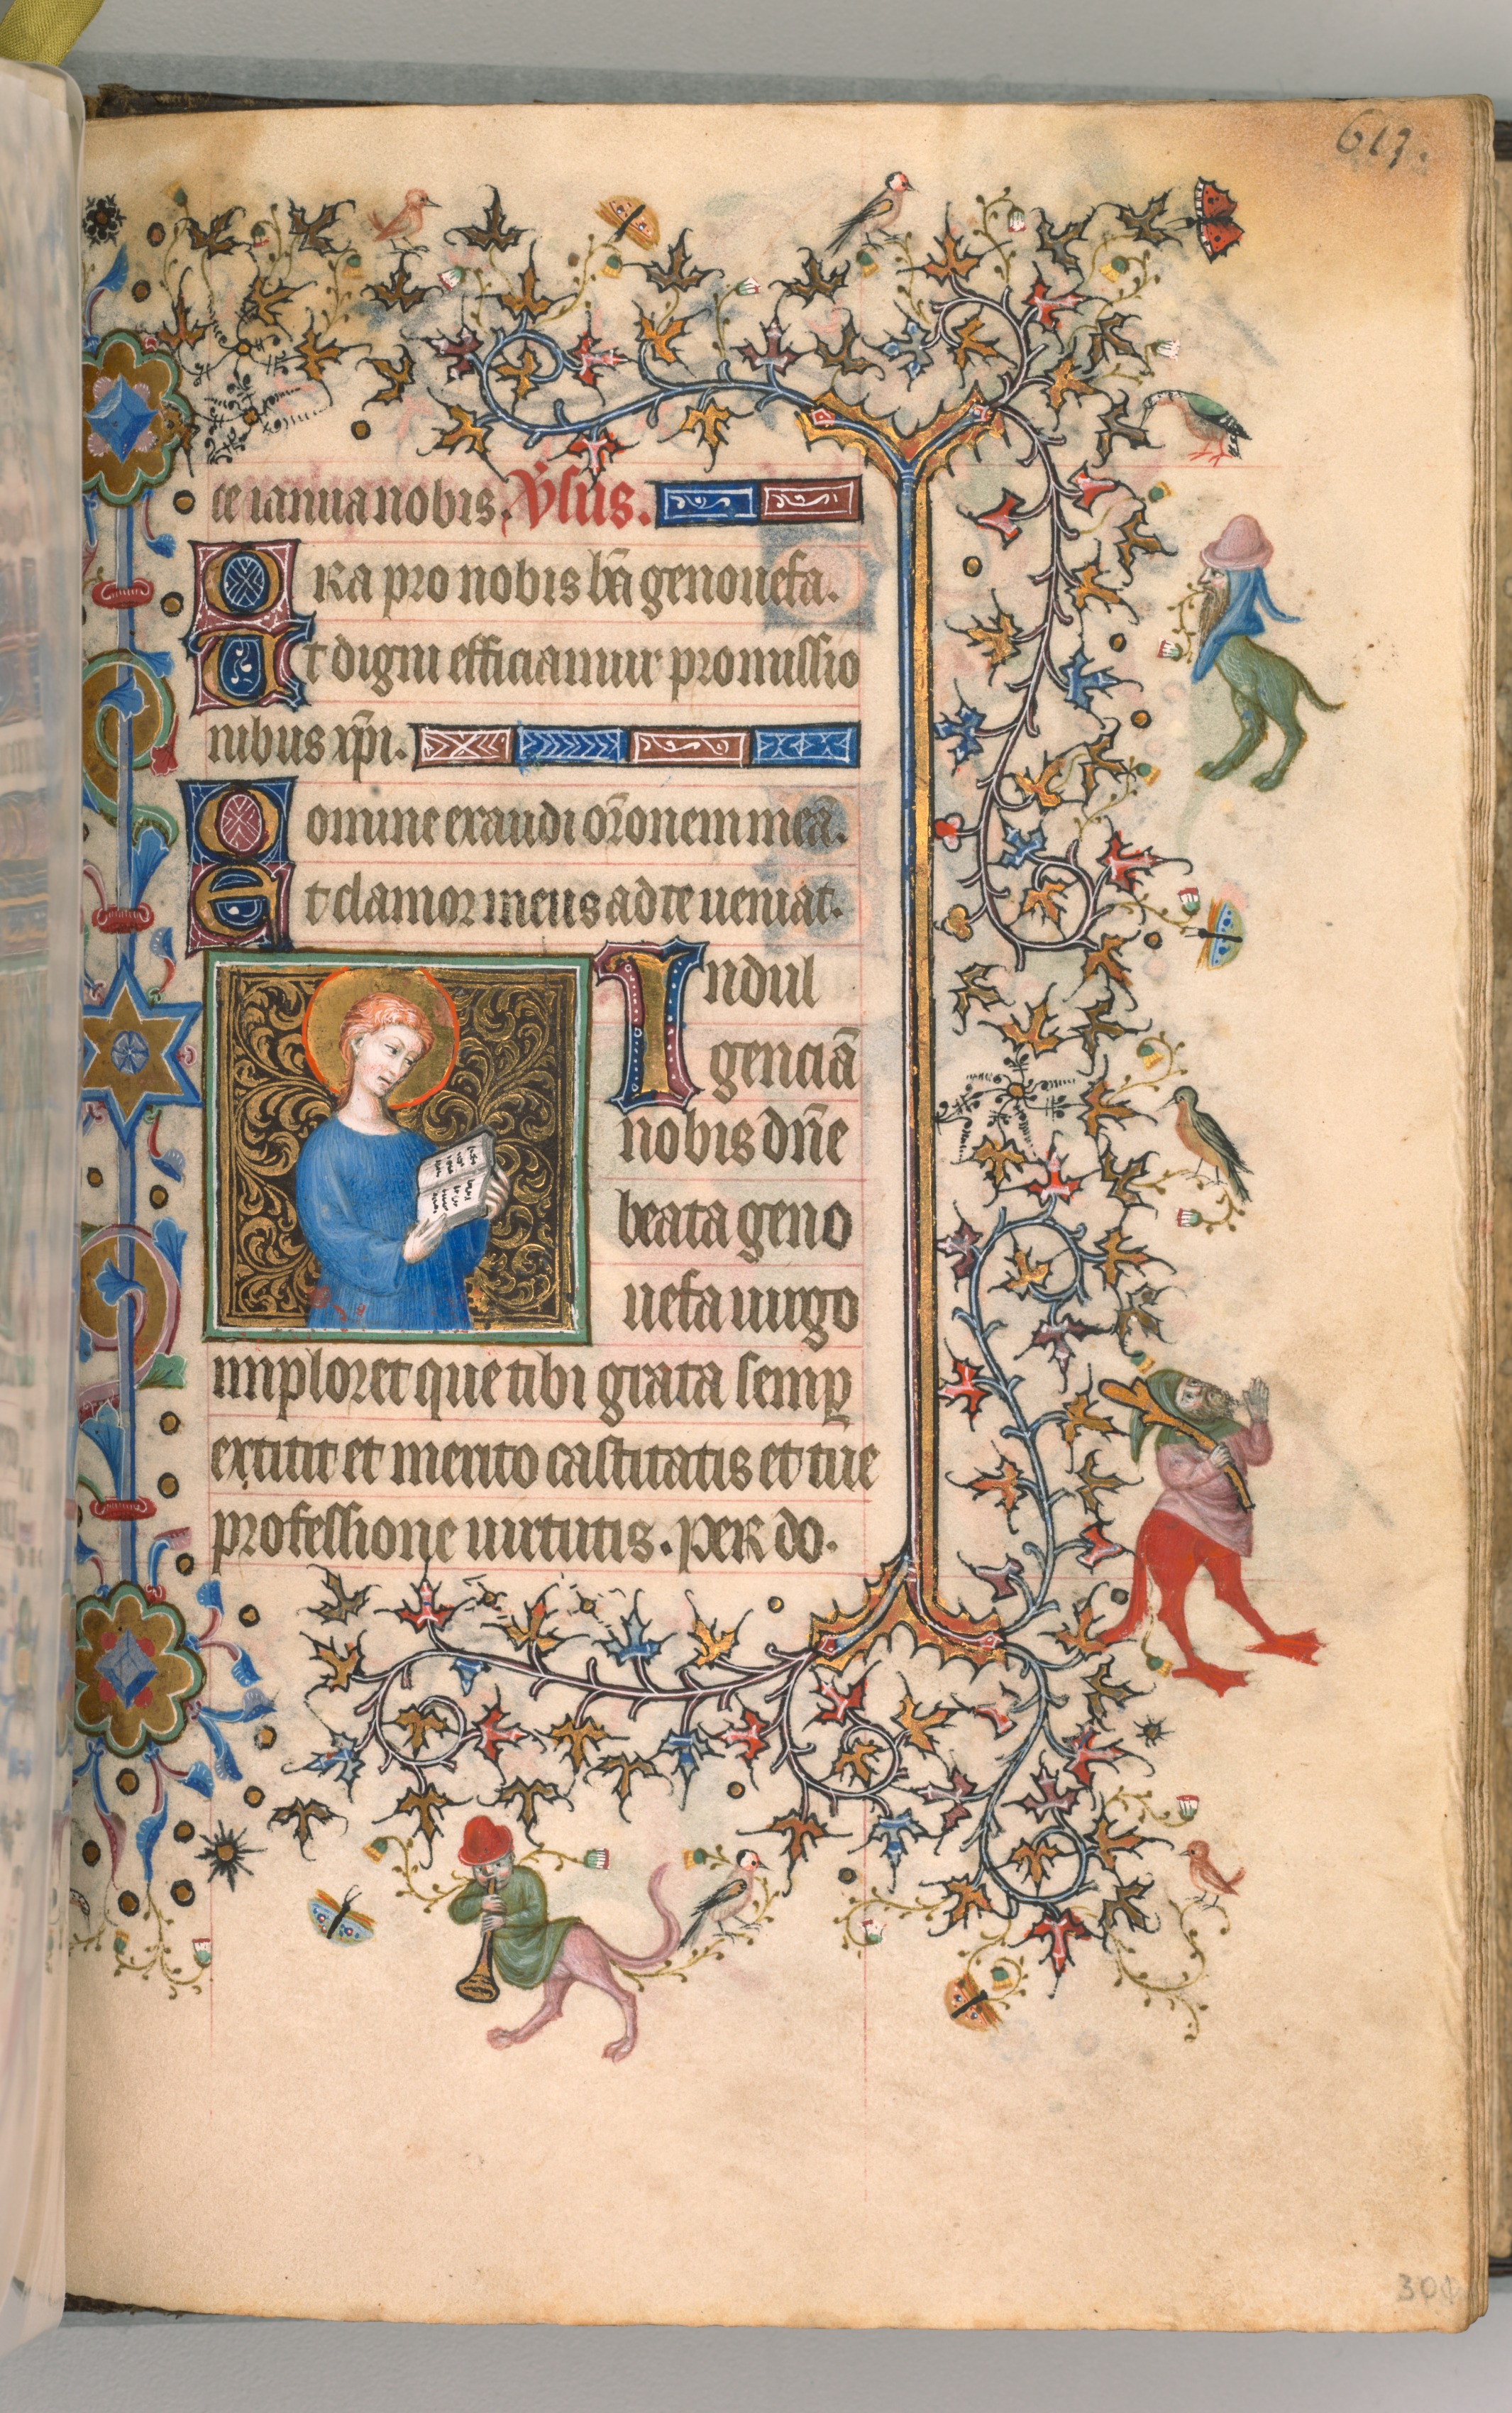 Hours of Charles the Noble, King of Navarre (1361-1425): fol. 301r, St. Geneviève